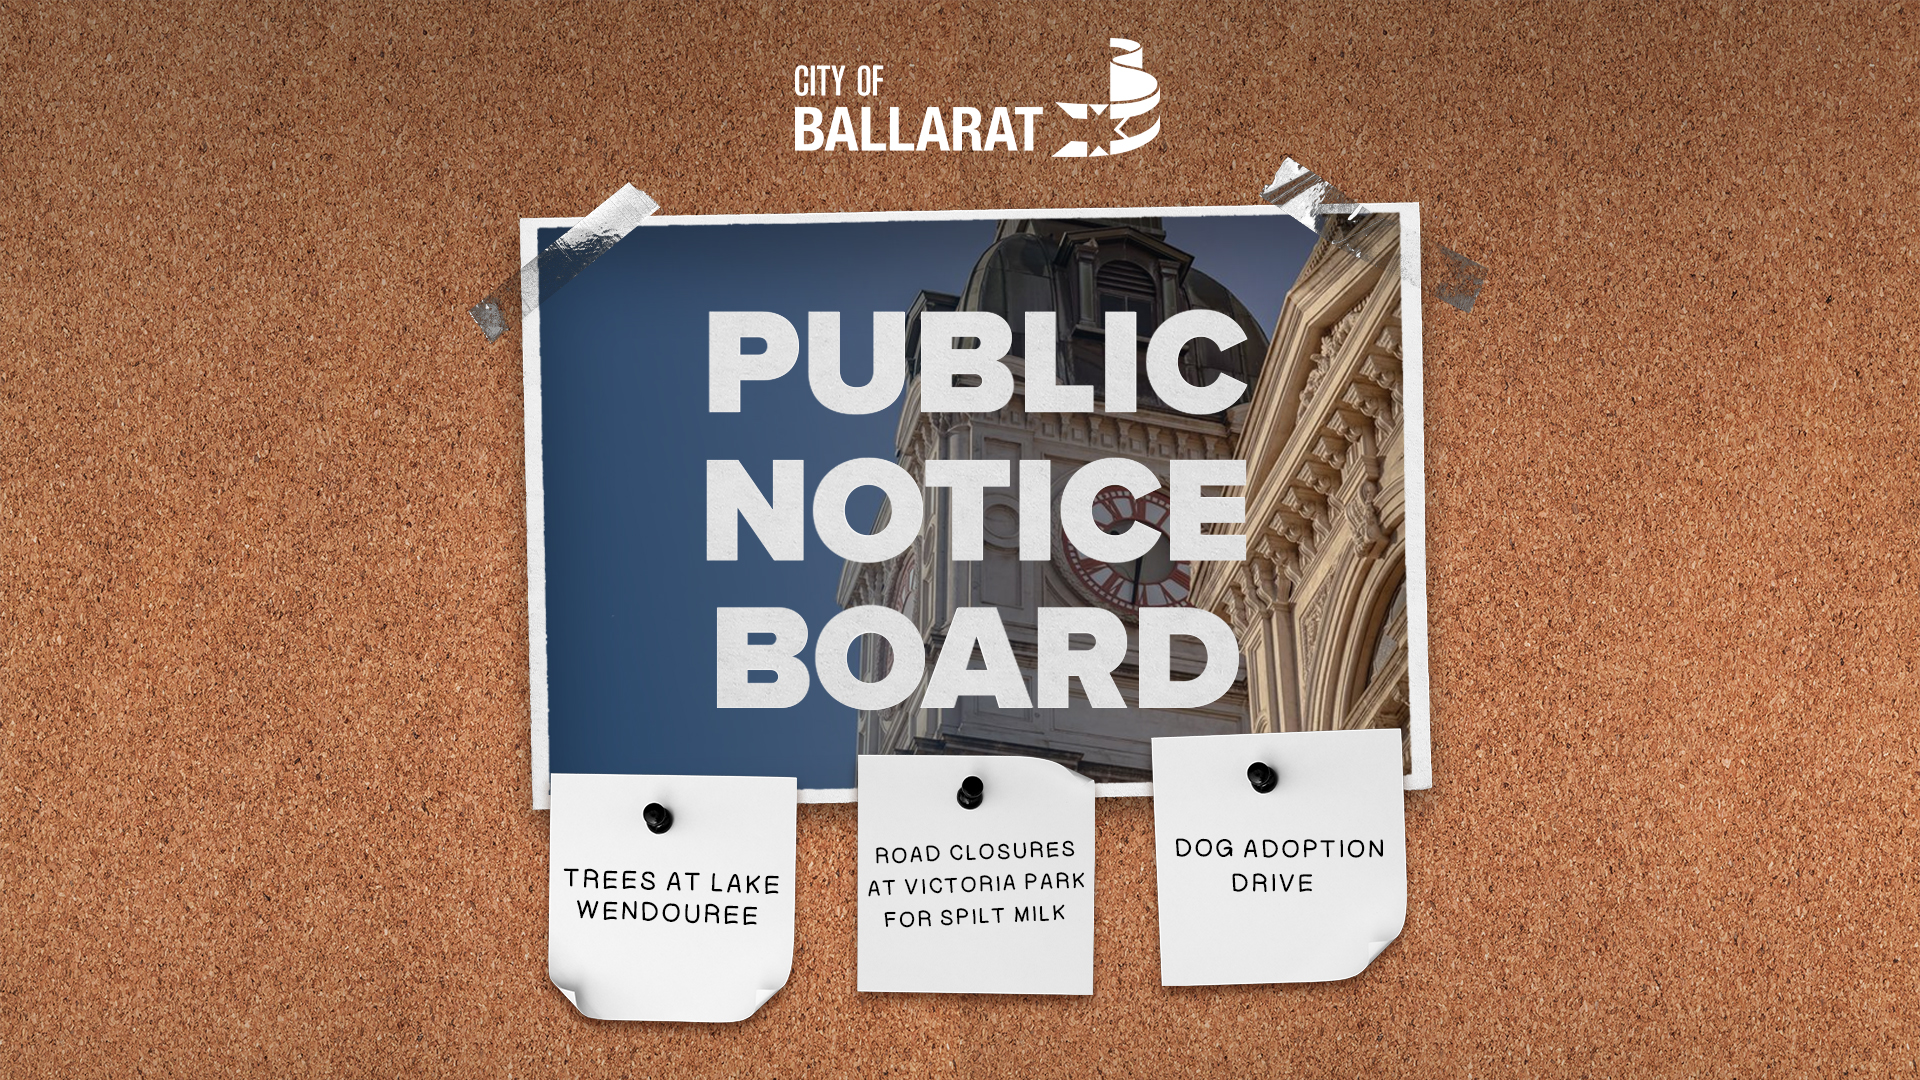 Notice board with Public Notice Board text over an image of Ballarat Town Hall. Three notes underneath with text saying TREES AT LAKE WENDOUREE, ROAD CLOSURES AT VICTORIA PARK FOR SPILT MILK, DOG ADOPTION DRIVE